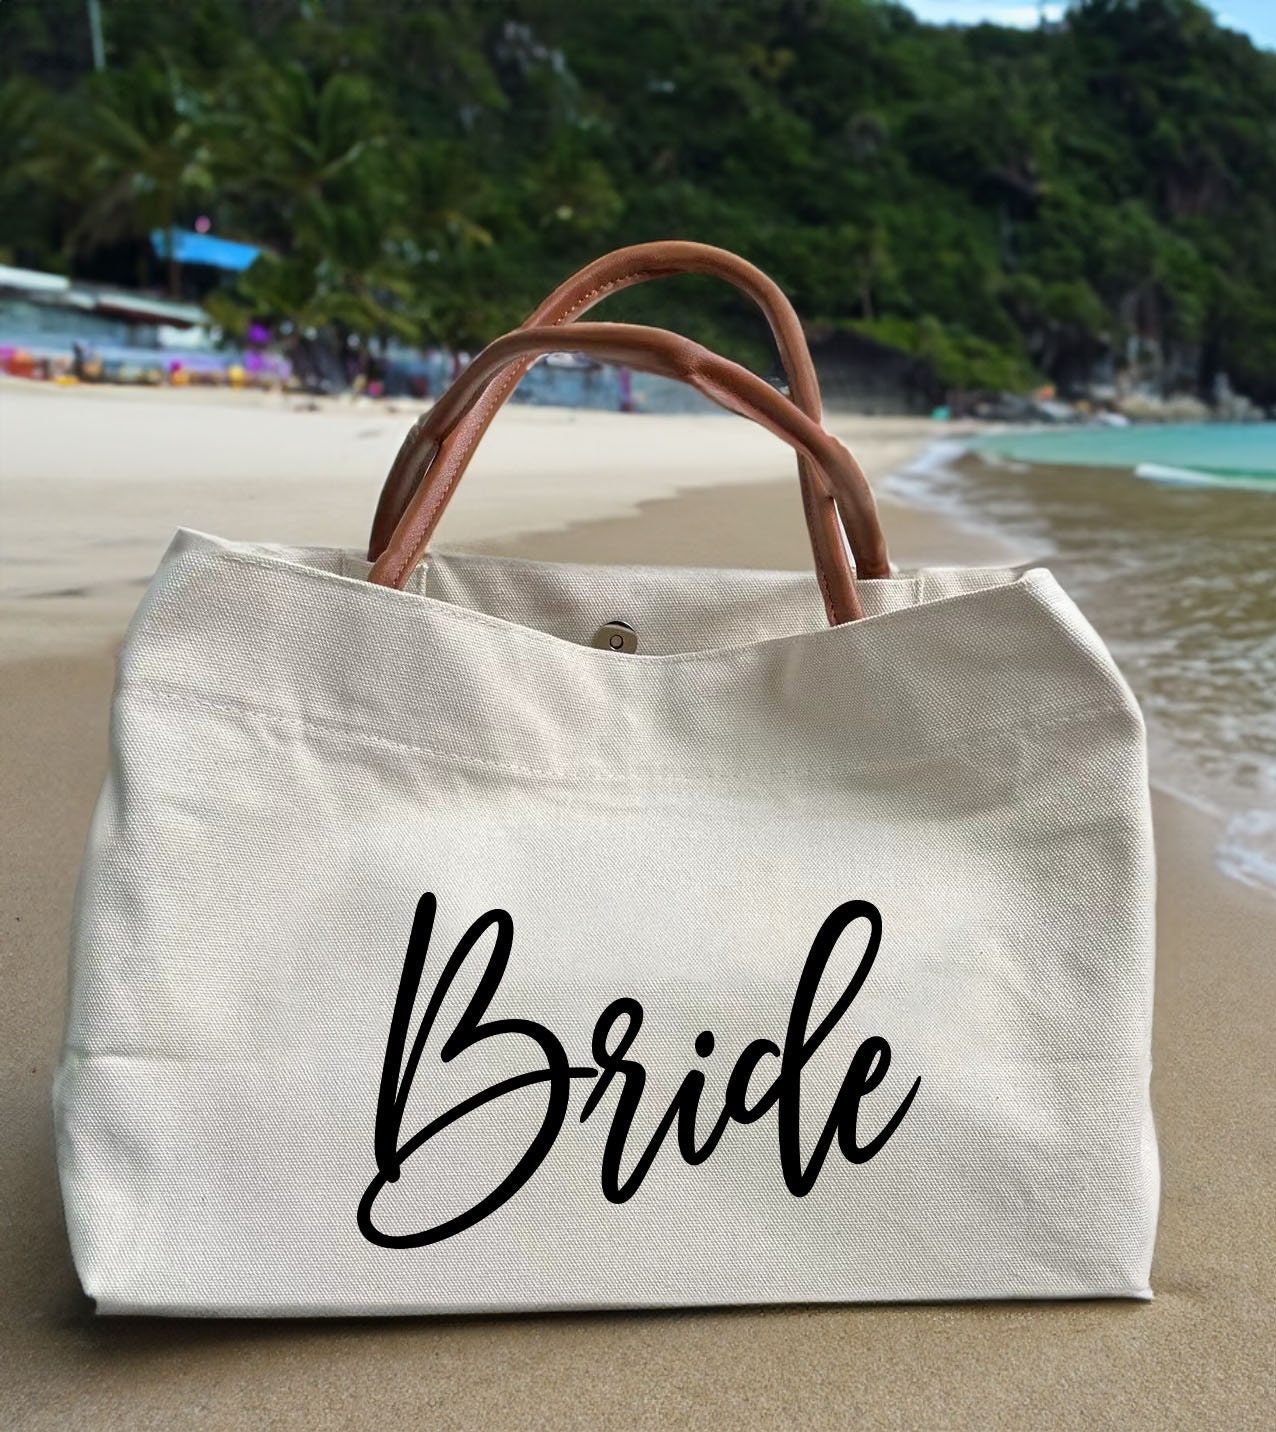 Sweetude Bride Bag Canvas Tote Bag with Zipper Bride Gifts Makeup Bag  Bridal Shower Gifts for Bachelorette Party Bridal Shower Wedding Gift